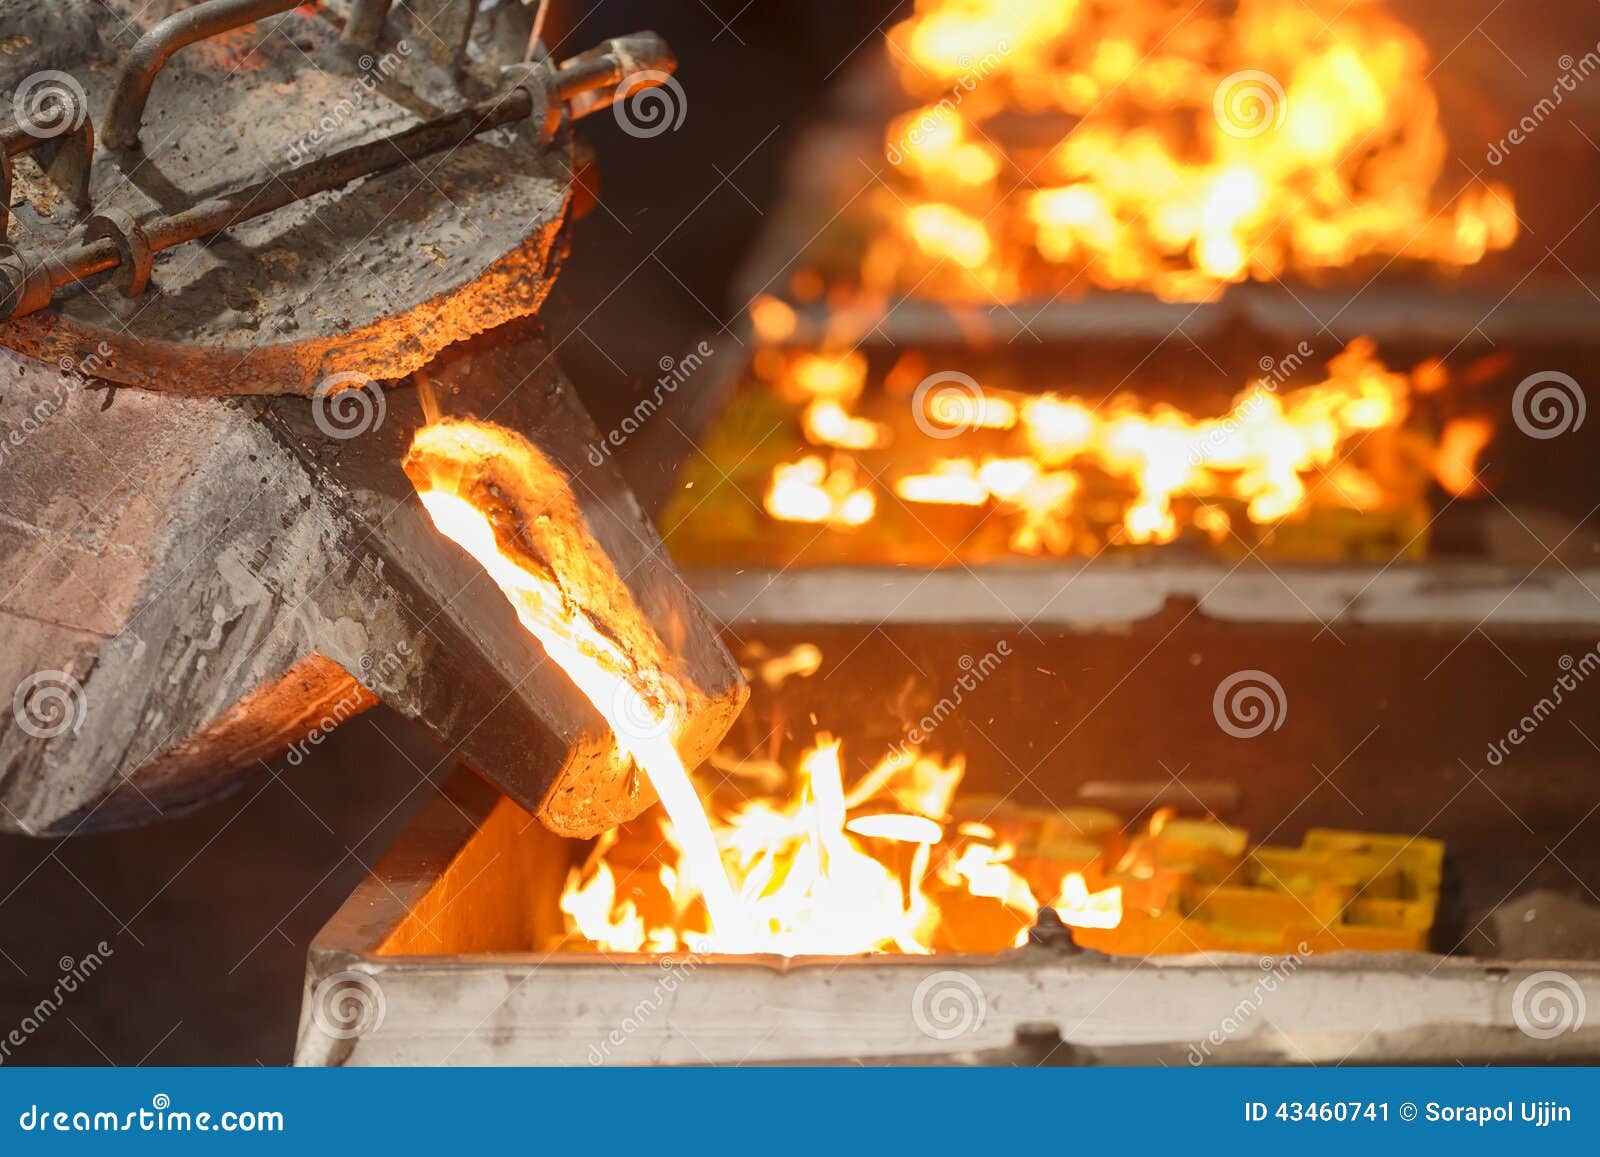 pouring molten metal to casting mold